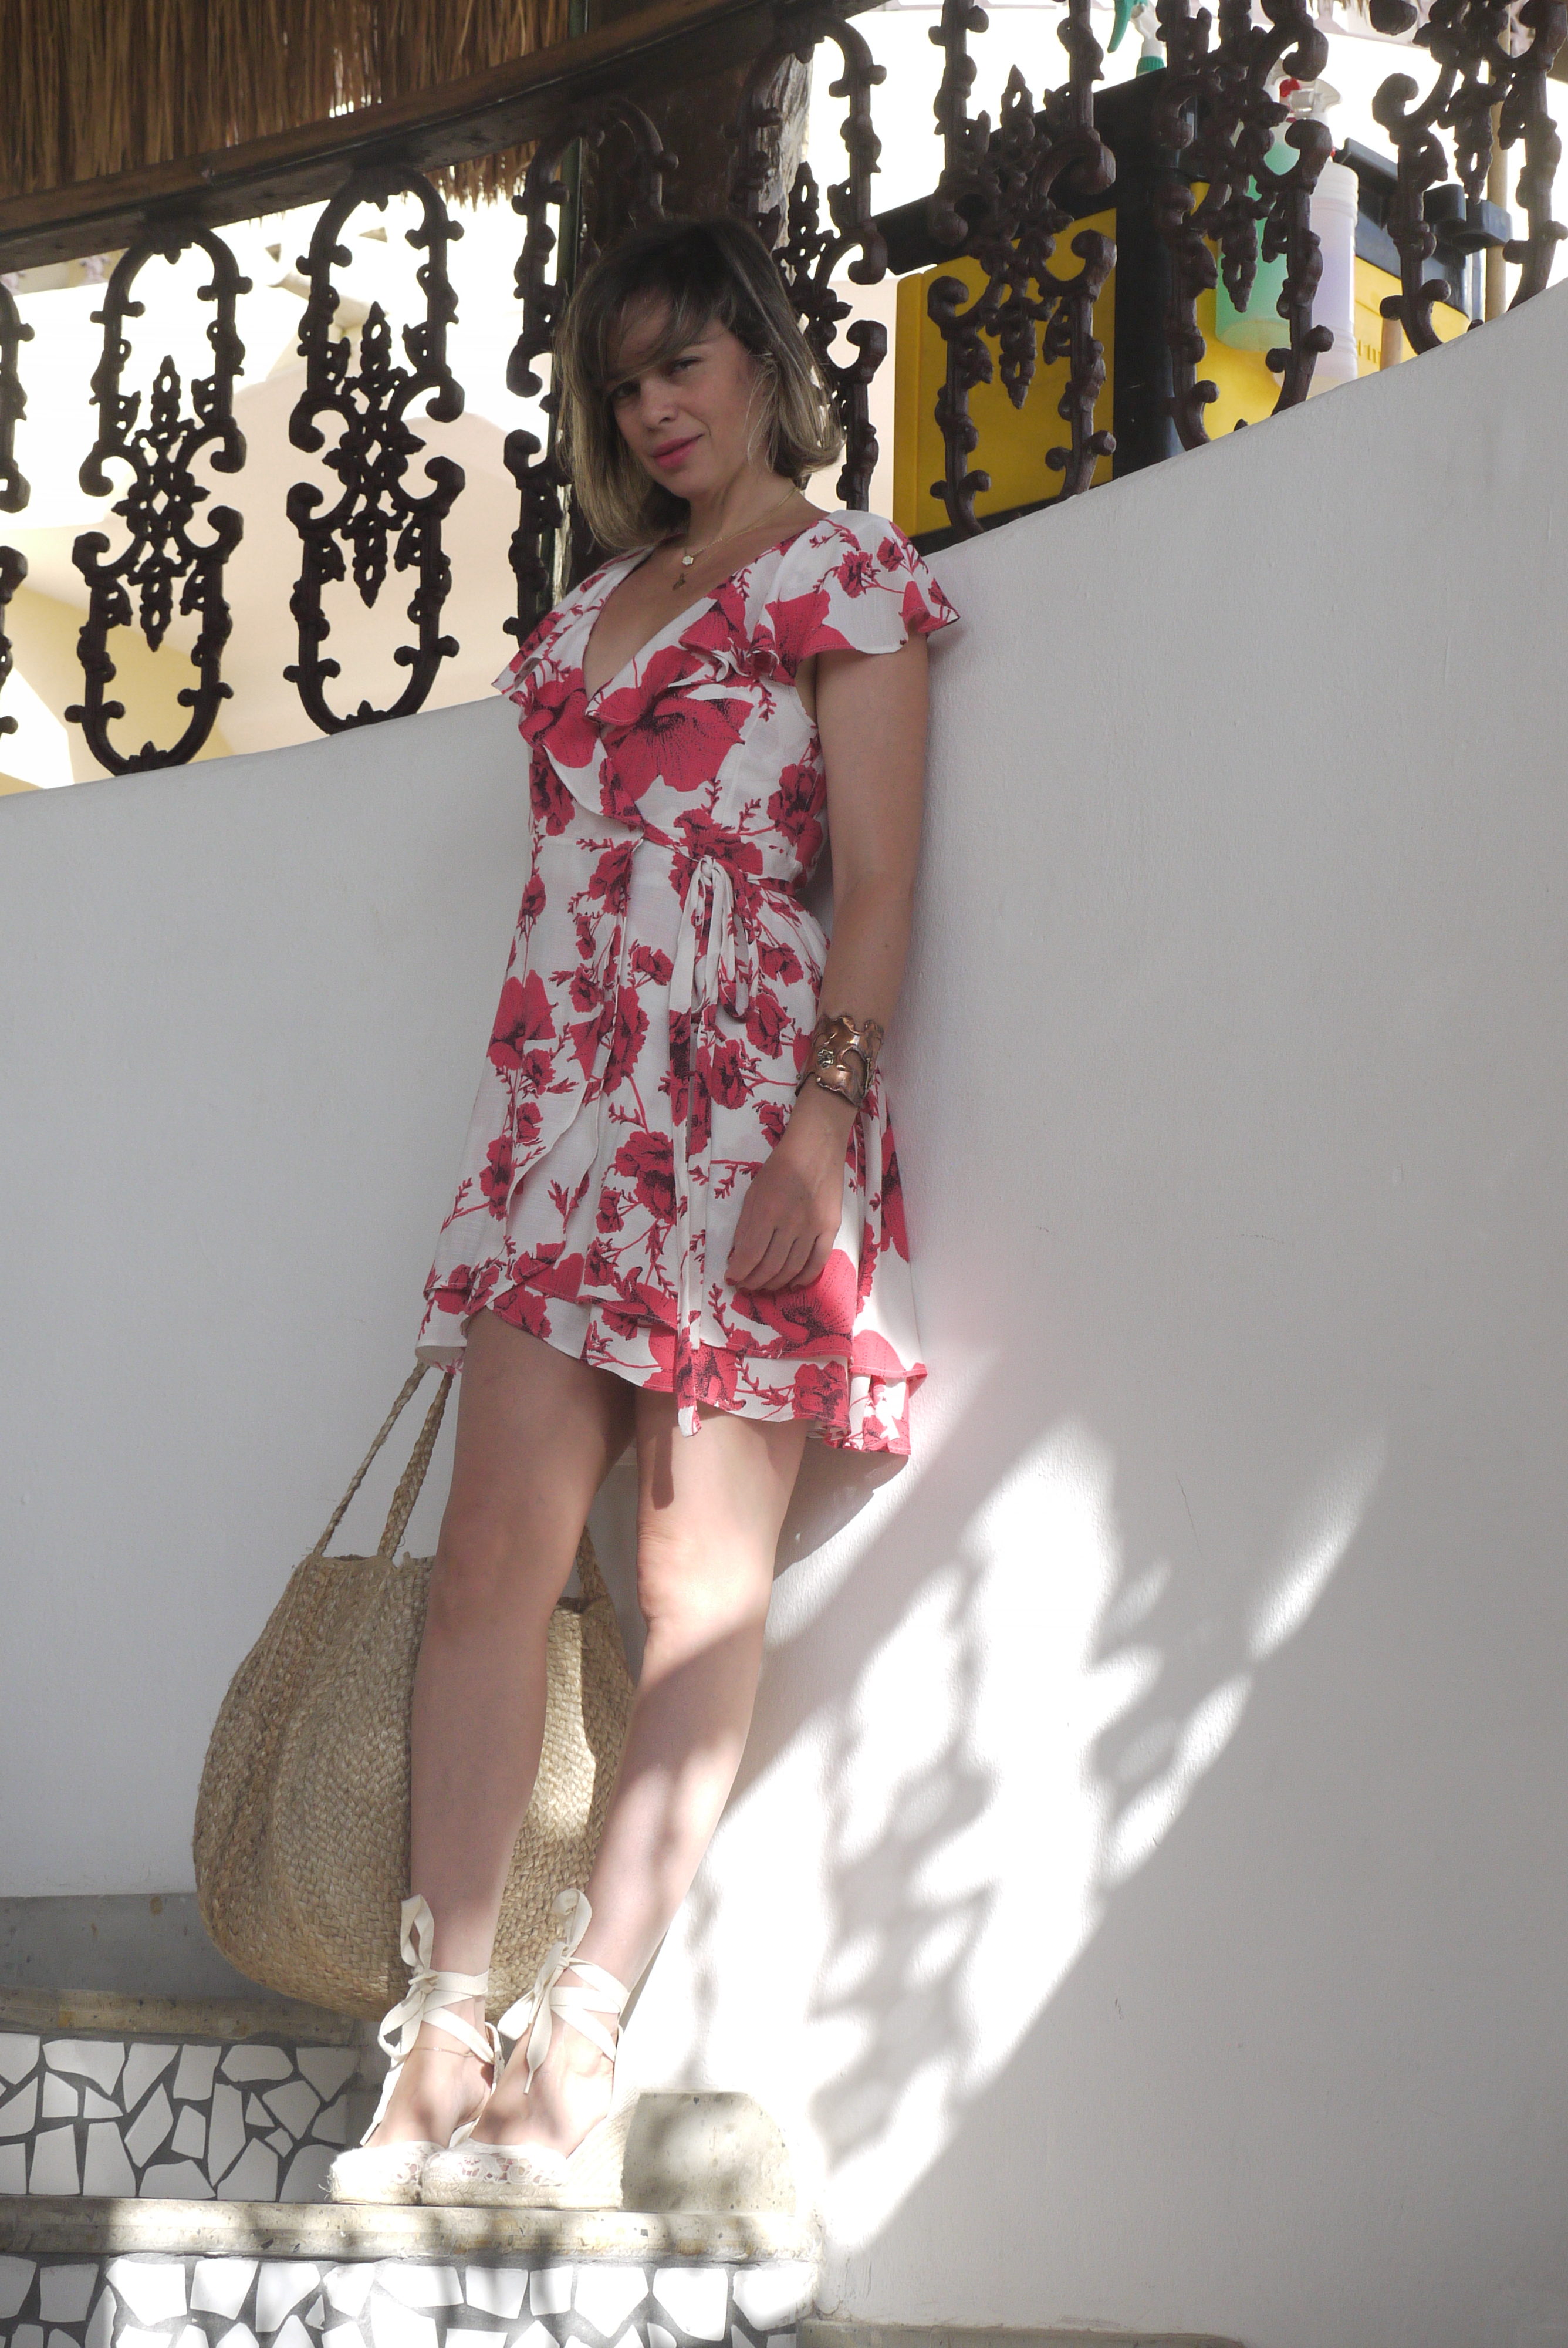 Alba Marina Otero fashion blogger from Mylovelypeople blog shares with you how to wear a wrap flower dress not only for summer but fall season too